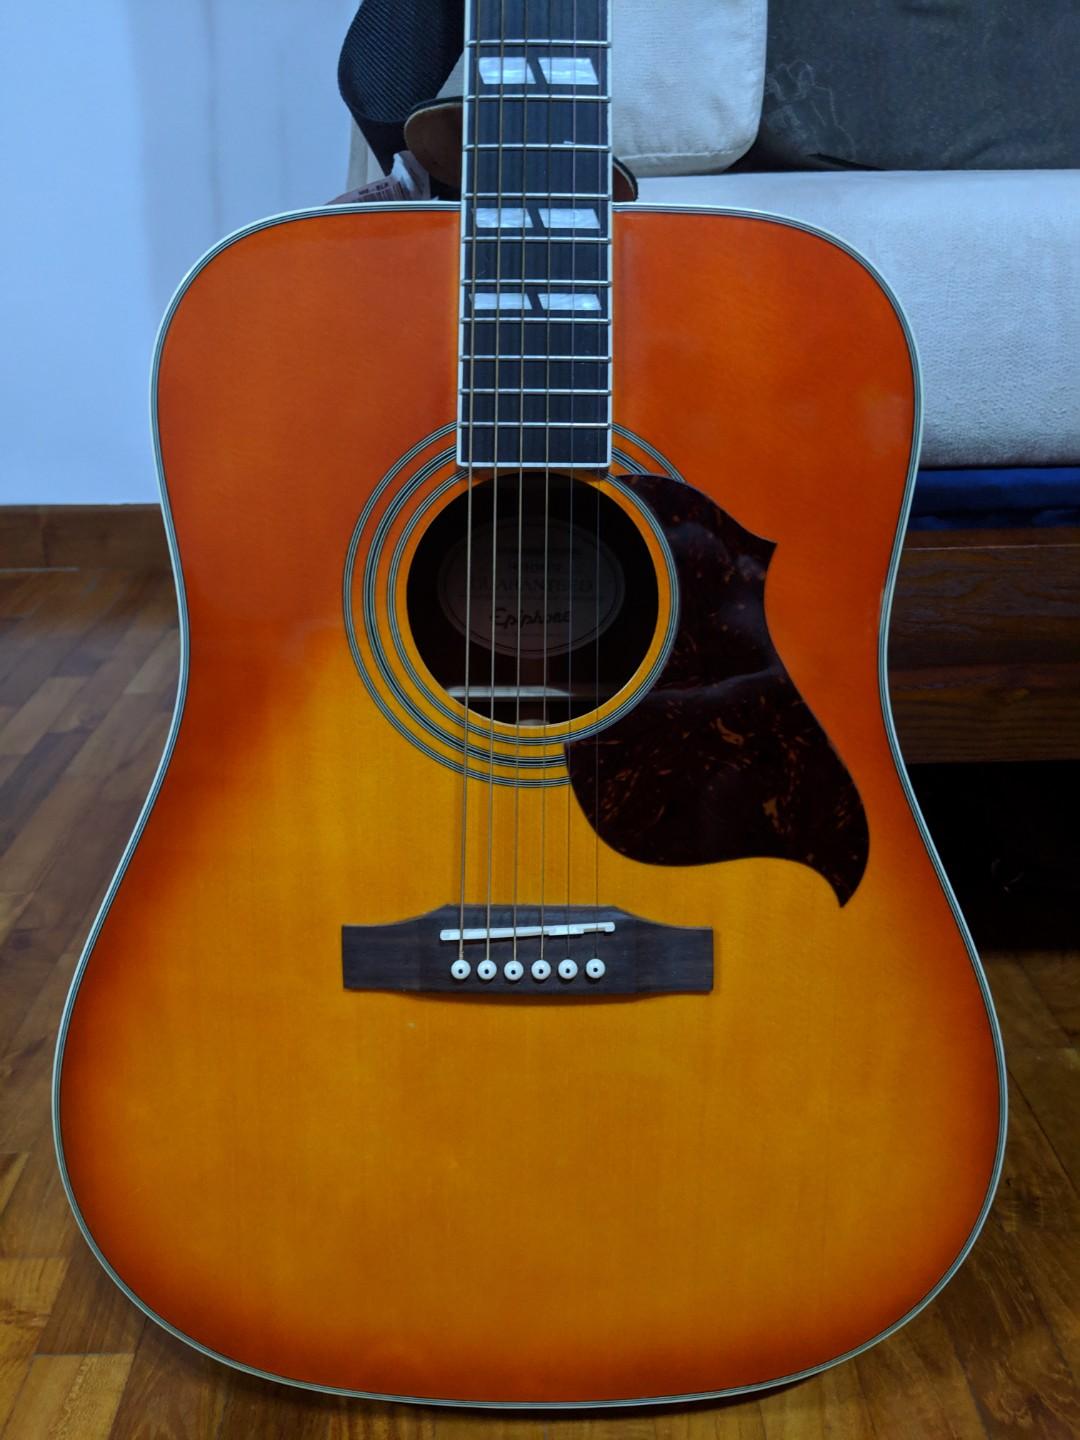 Epiphone 2014 Limited Edition Hummingbird Artist Acoustic Guitar, Hobbies   Toys, Music  Media, Musical Instruments on Carousell